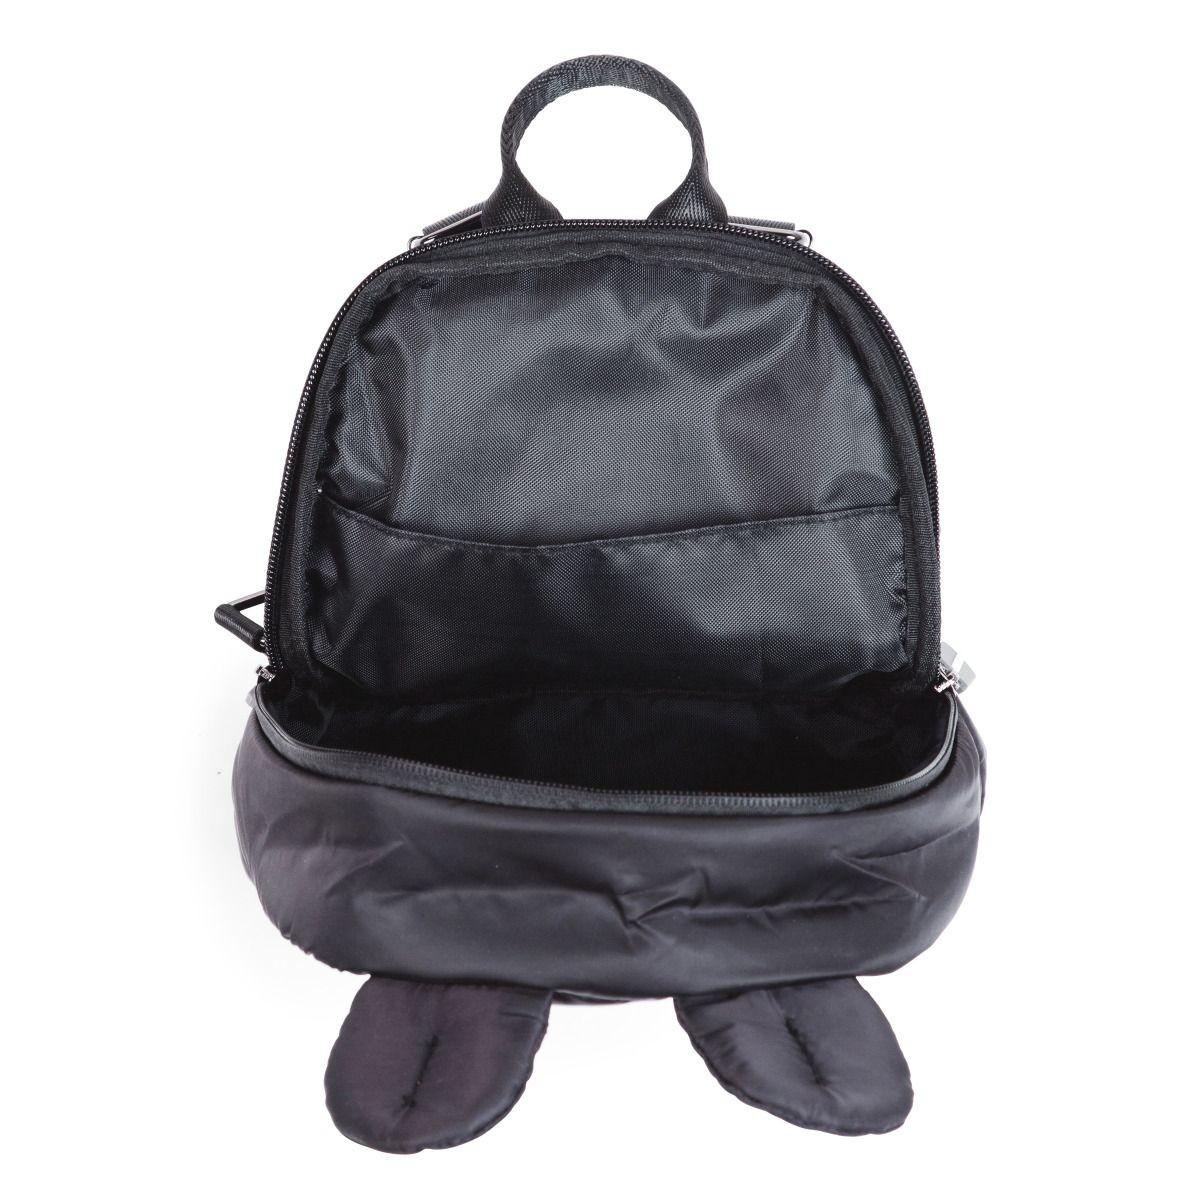 Childhome - Kids my first bag puffered black